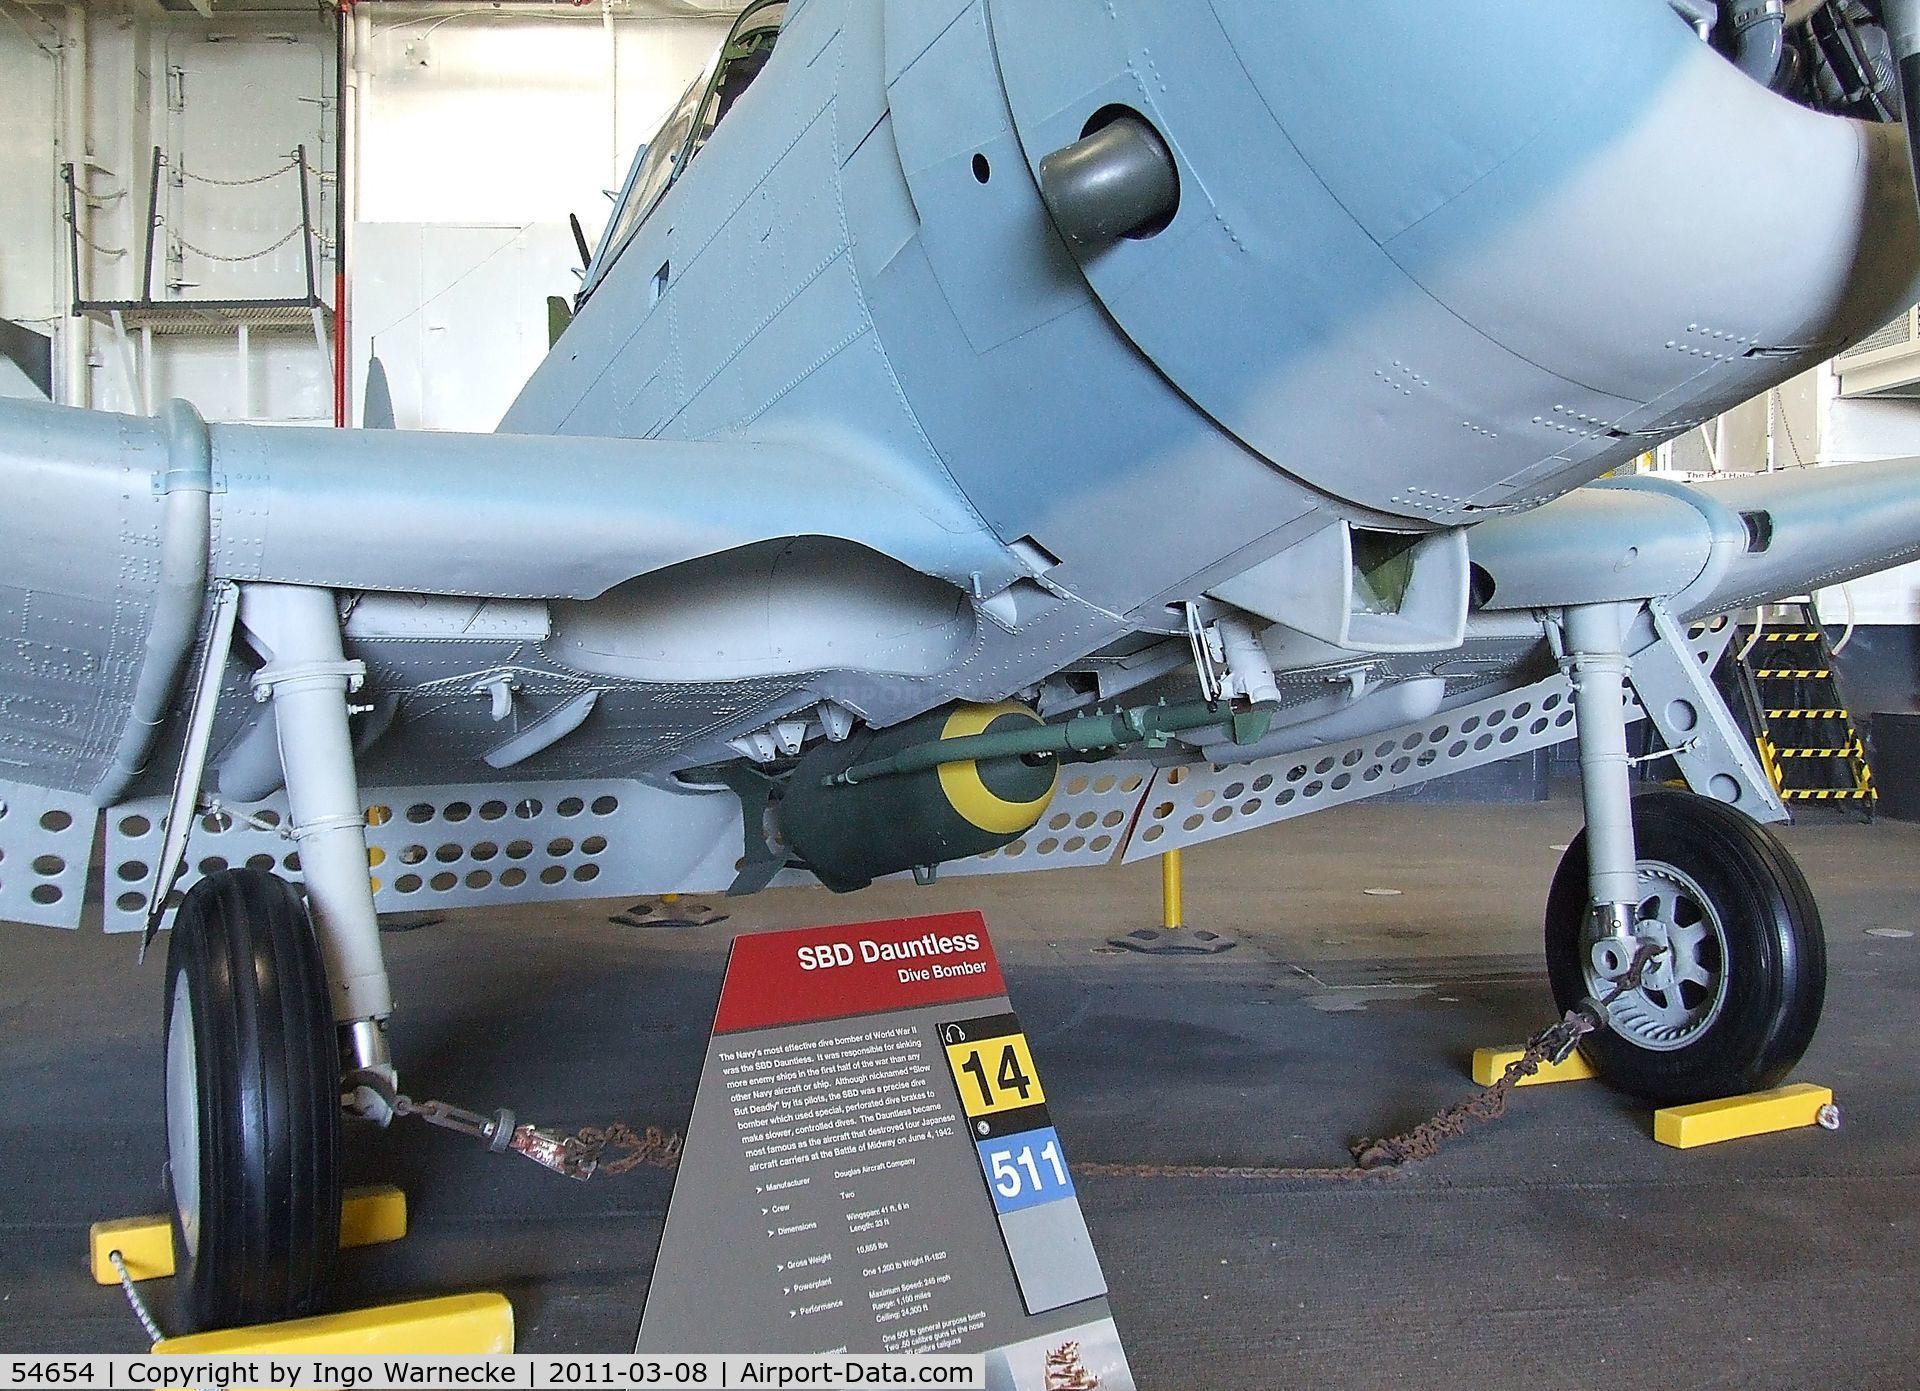 54654, Douglas SBD-6 Dauntless C/N 6168, Douglas SBD-6 Dauntless (rebuilt with aft fuselage of 54654 and parts of other SBDs) in the Hangar of the USS Midway Museum, San Diego CA